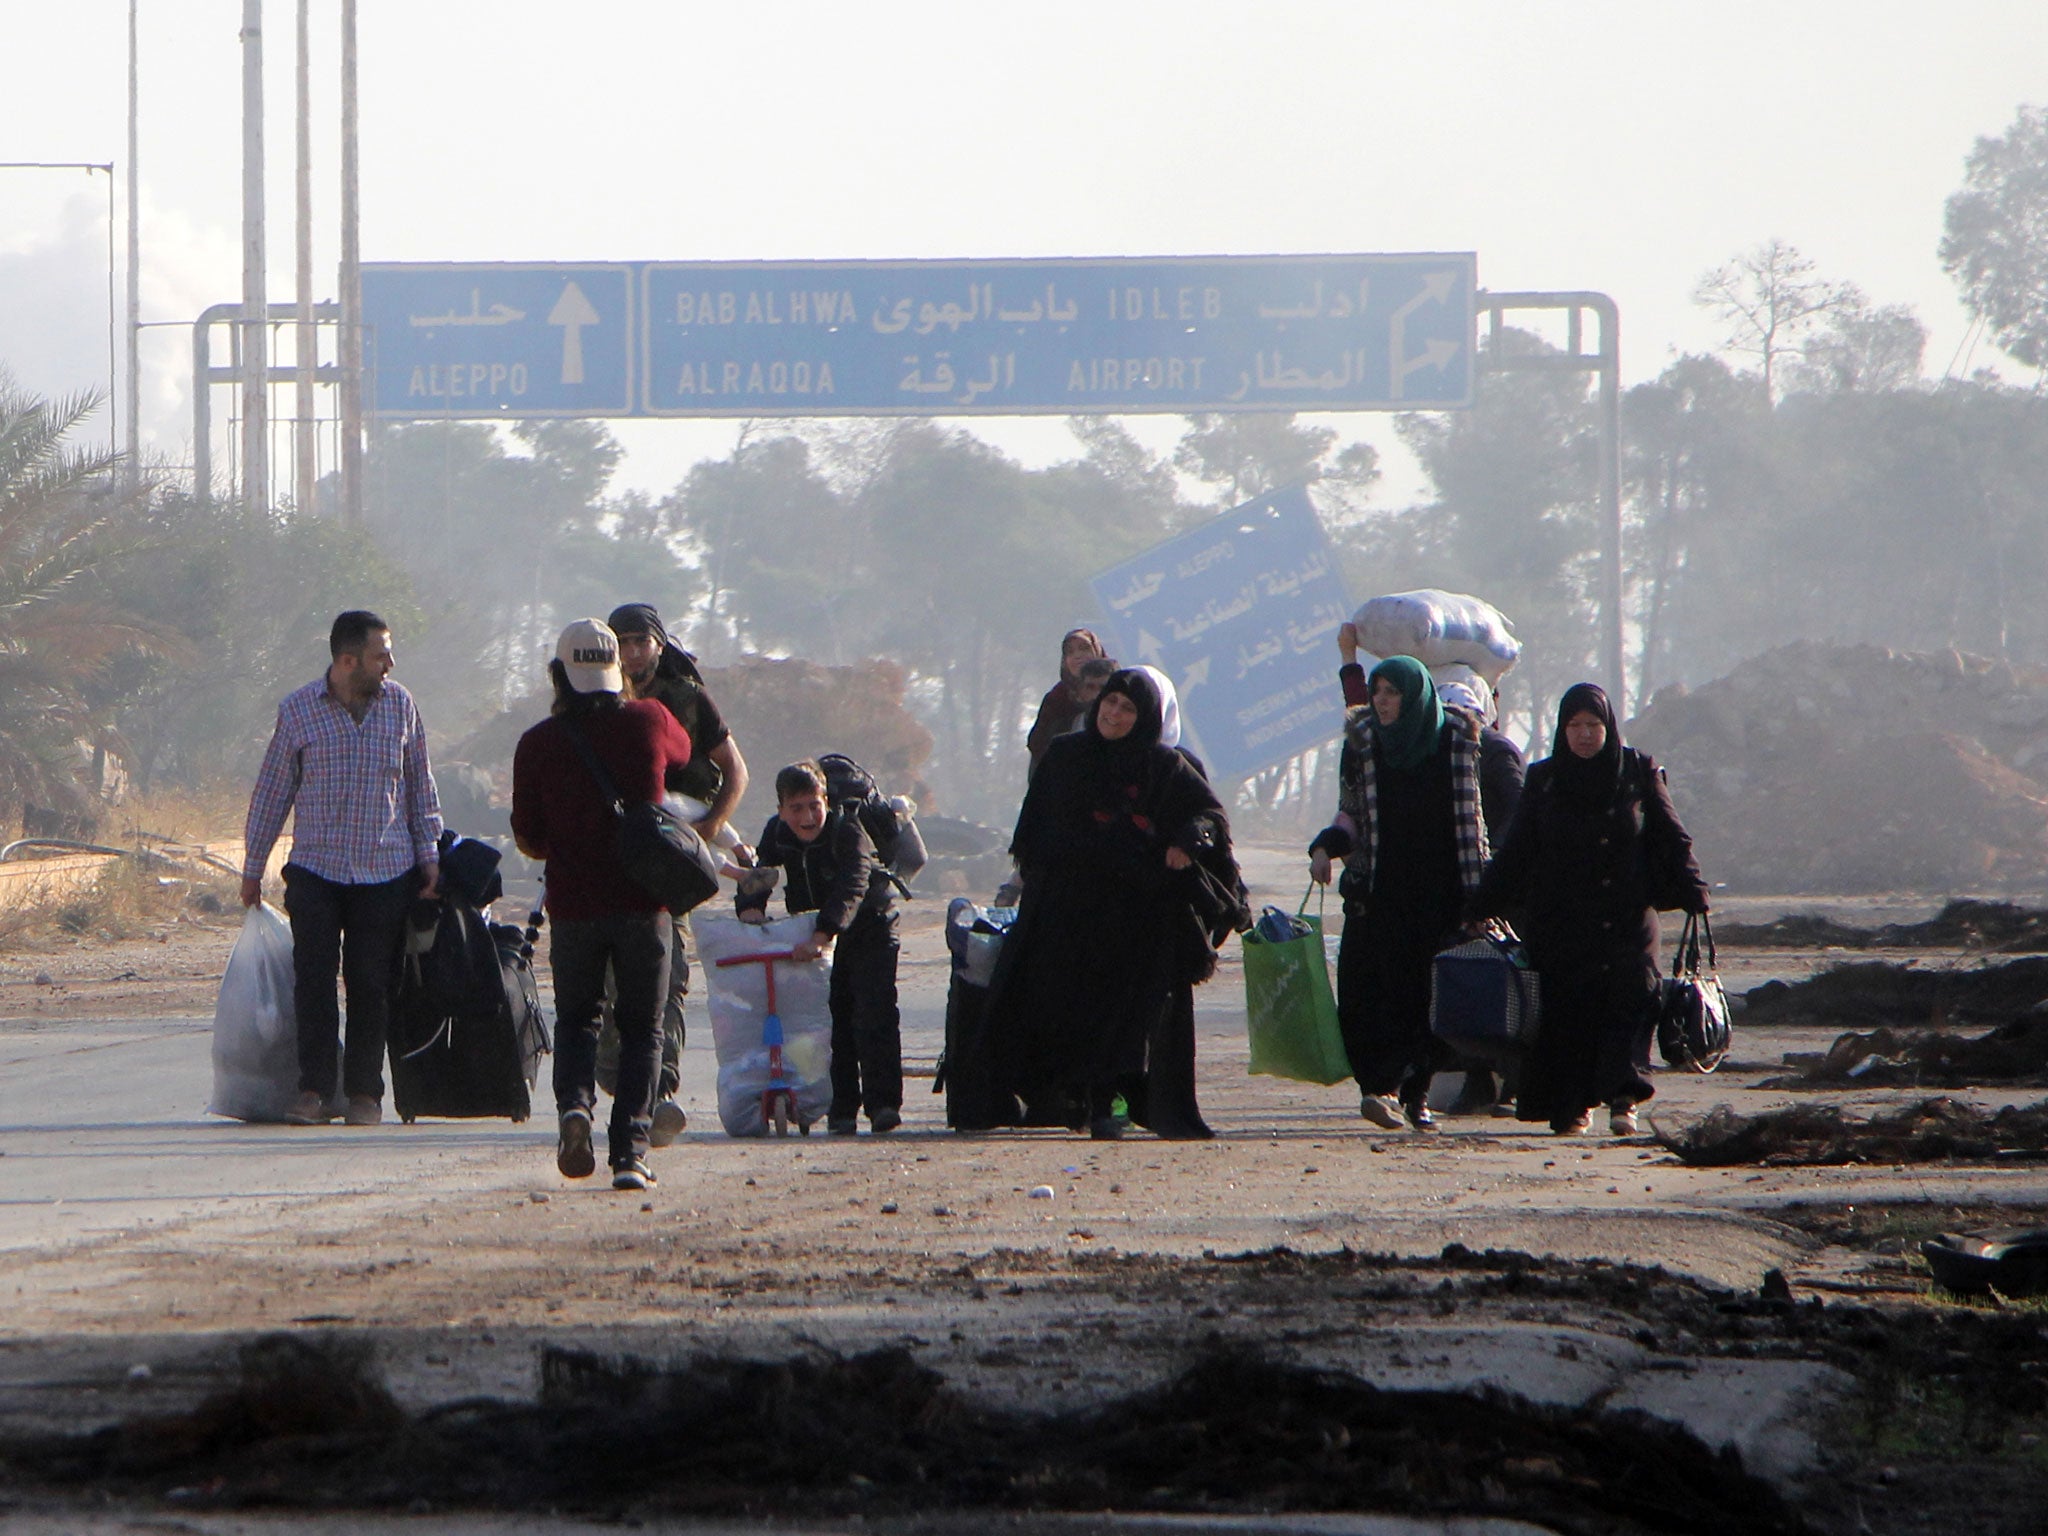 Syrians carry their belongings as they leave Aleppo’s southwestern frontline neighbourhood of Dahiyet al-Assad on Sunday